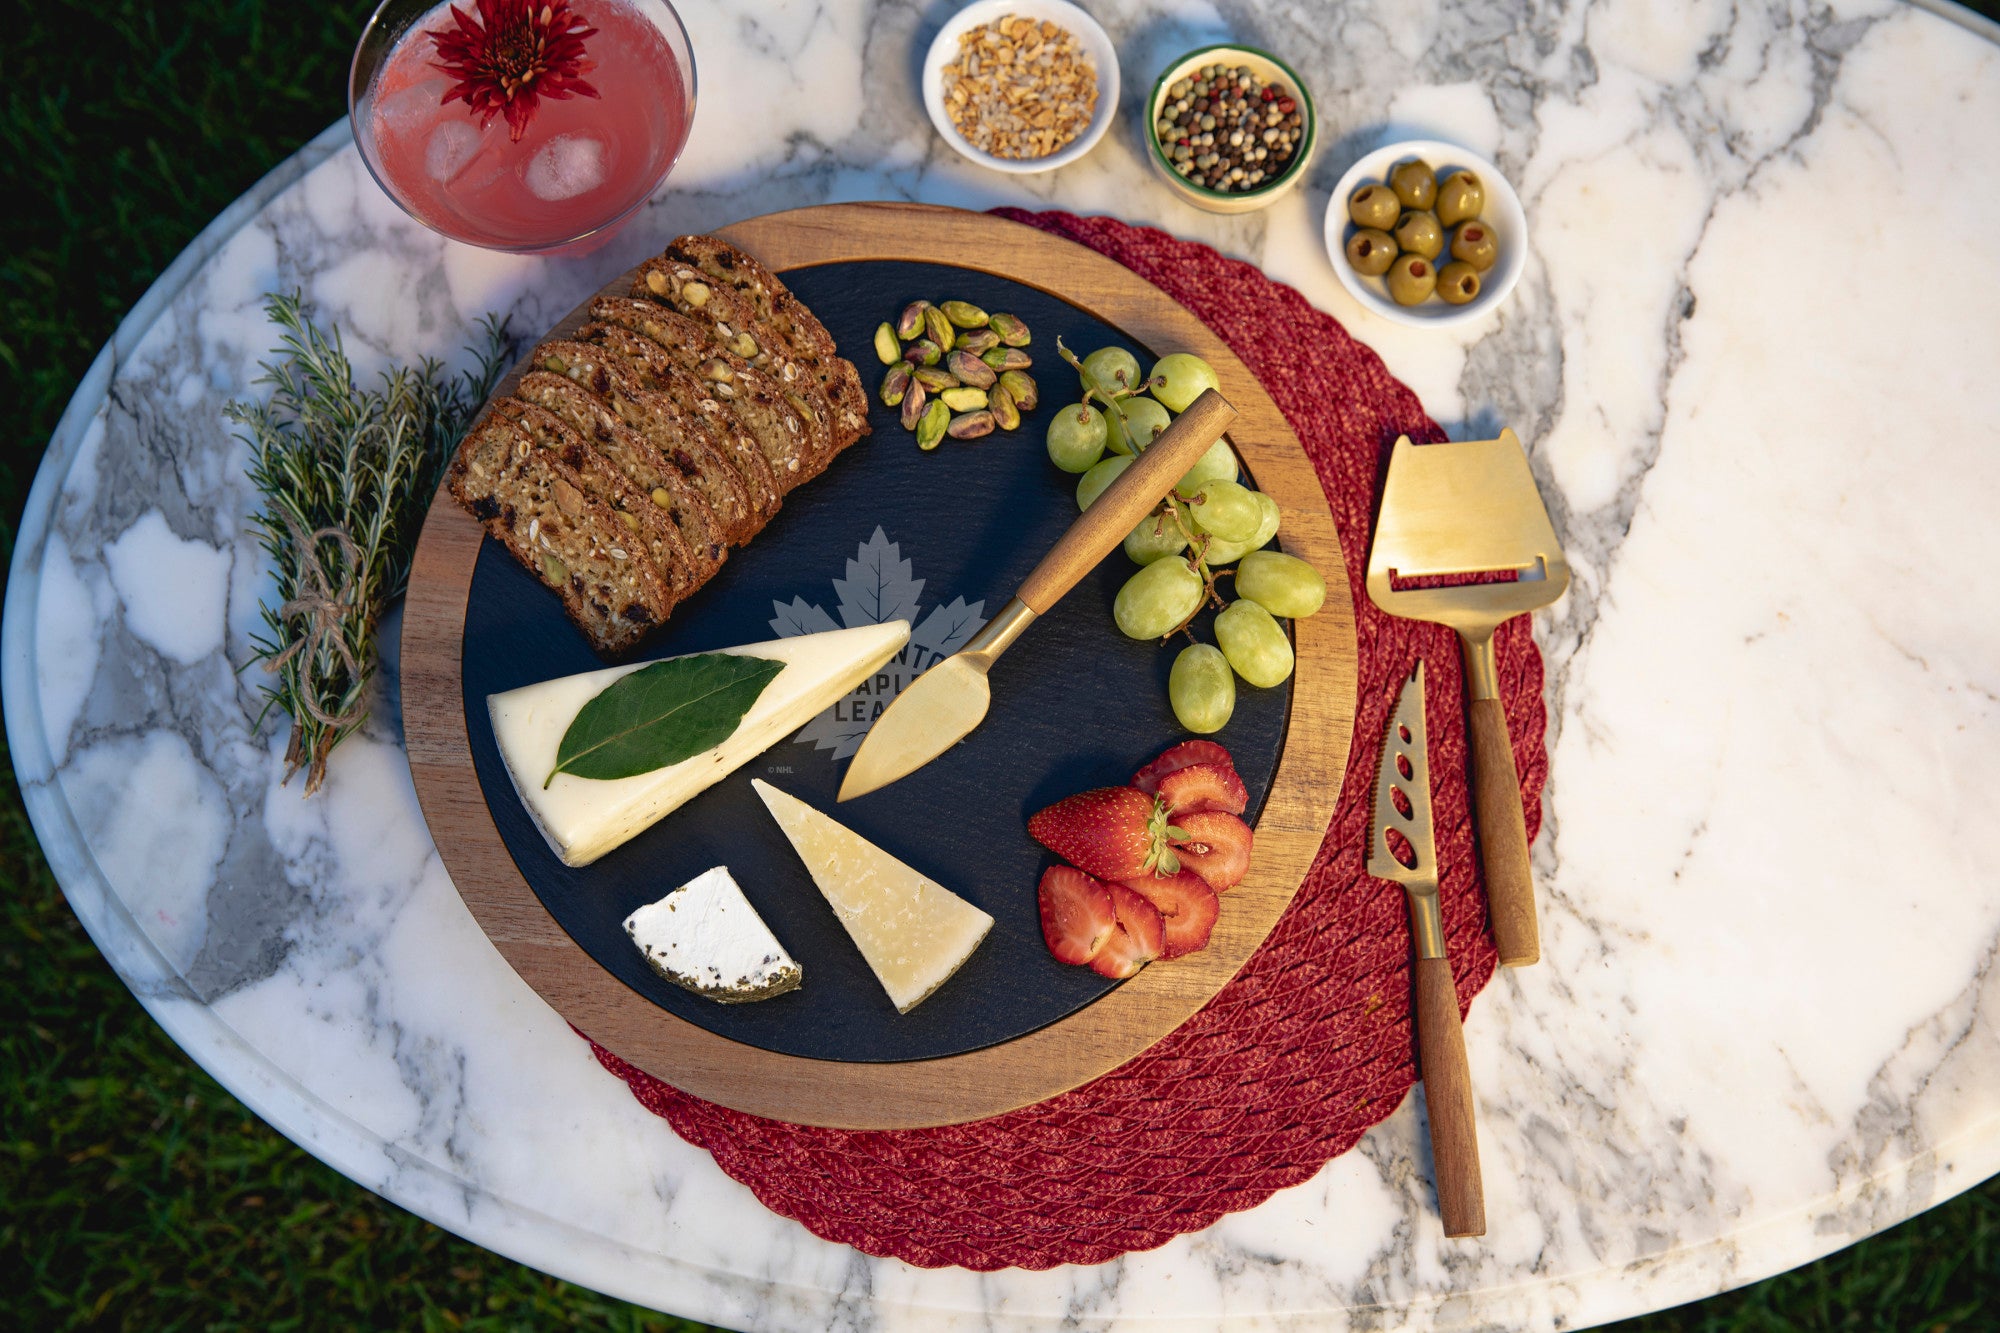 Toronto Maple Leafs - Insignia Acacia and Slate Serving Board with Cheese Tools